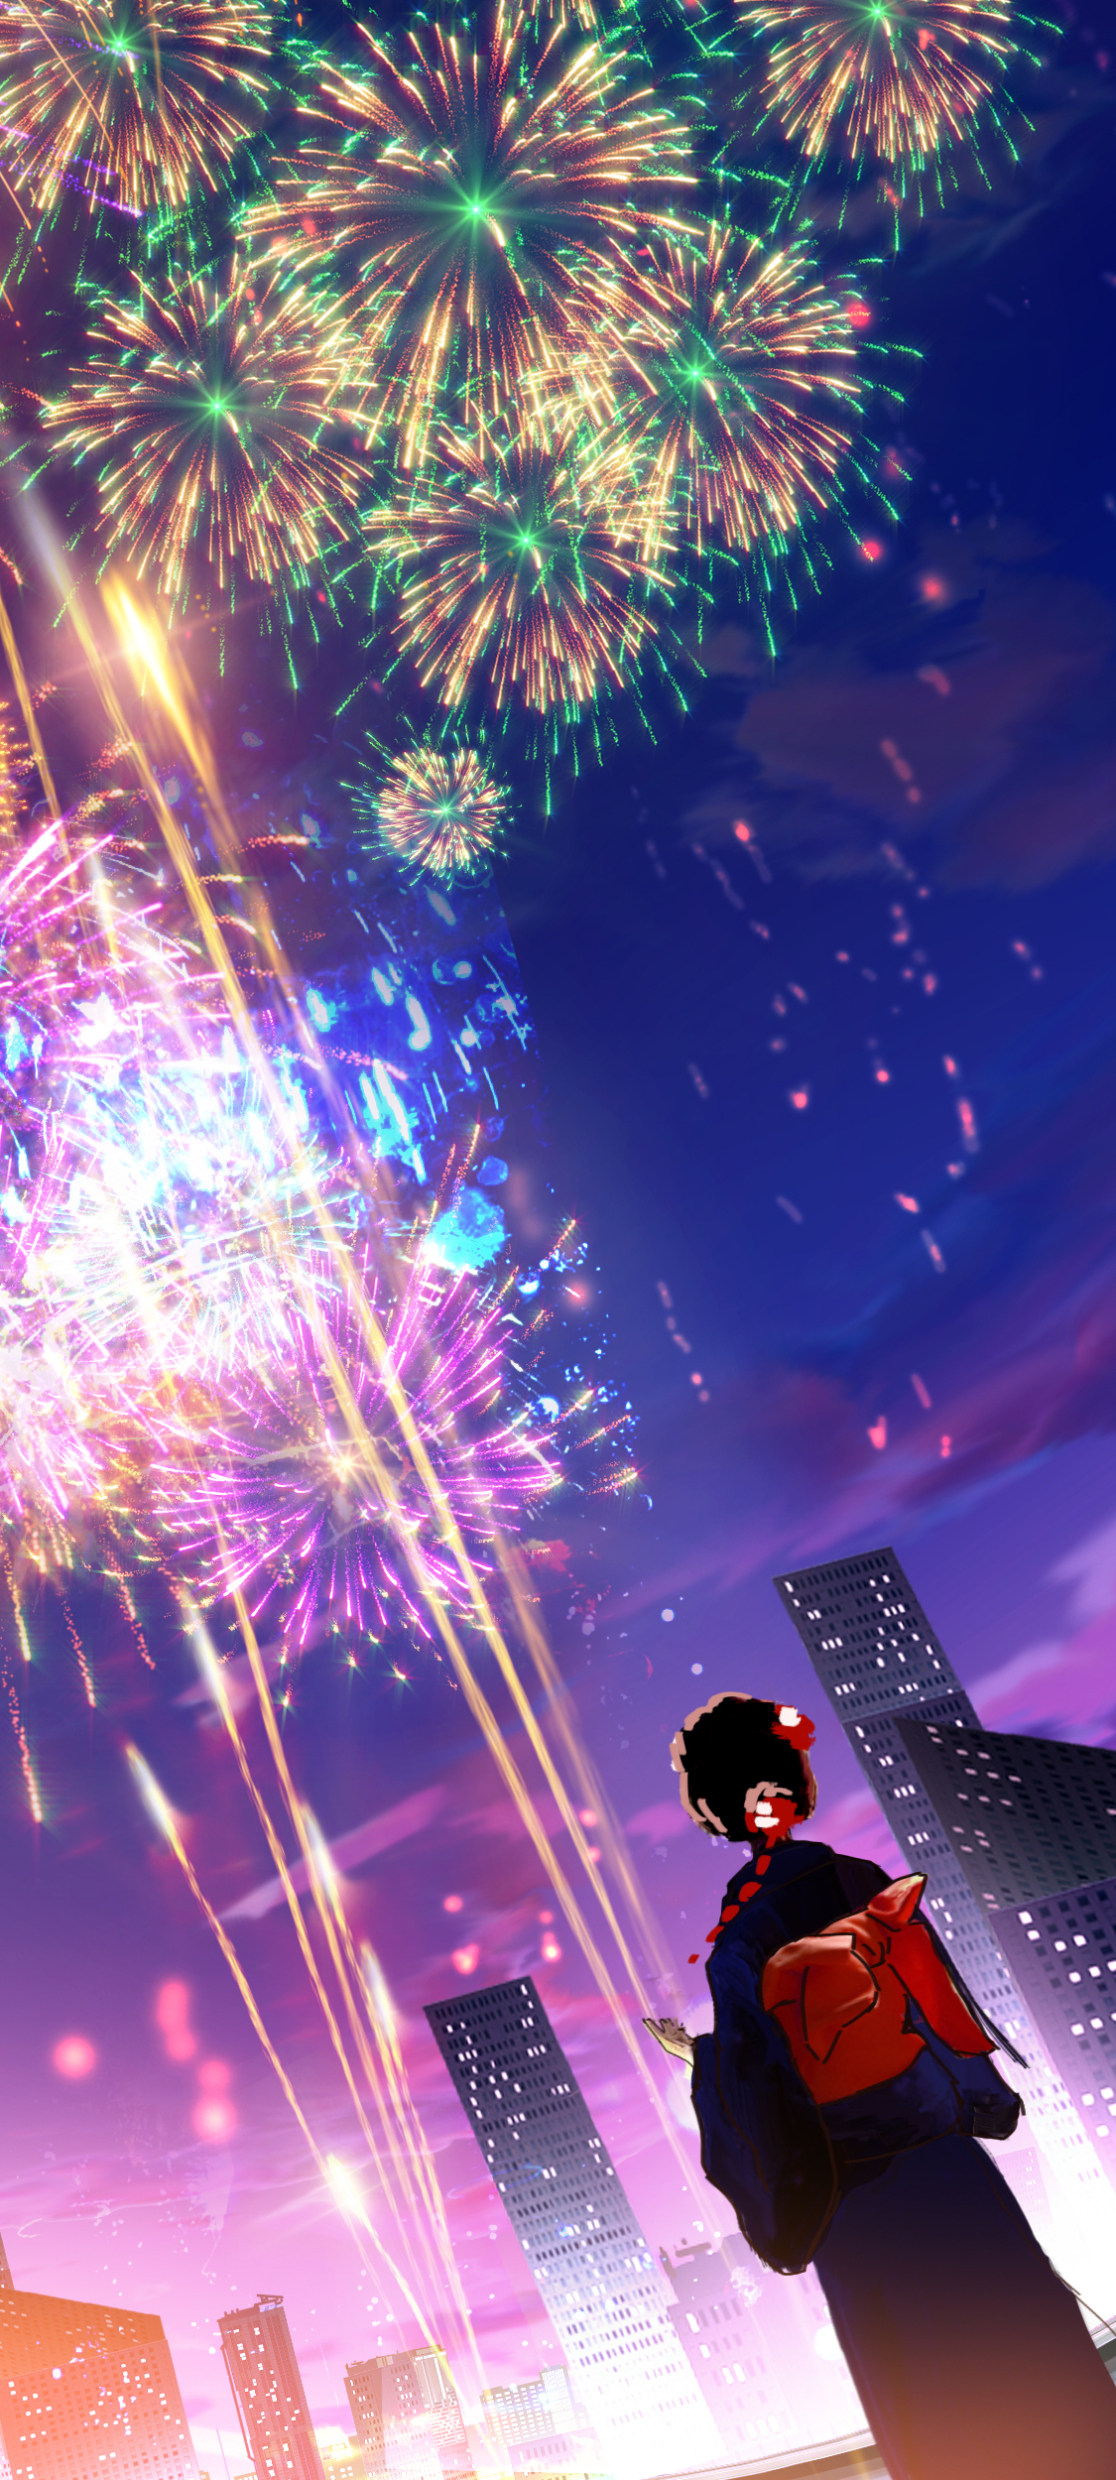 Wallpaper ID 428795  Anime City Phone Wallpaper Building Sky 750x1334  free download